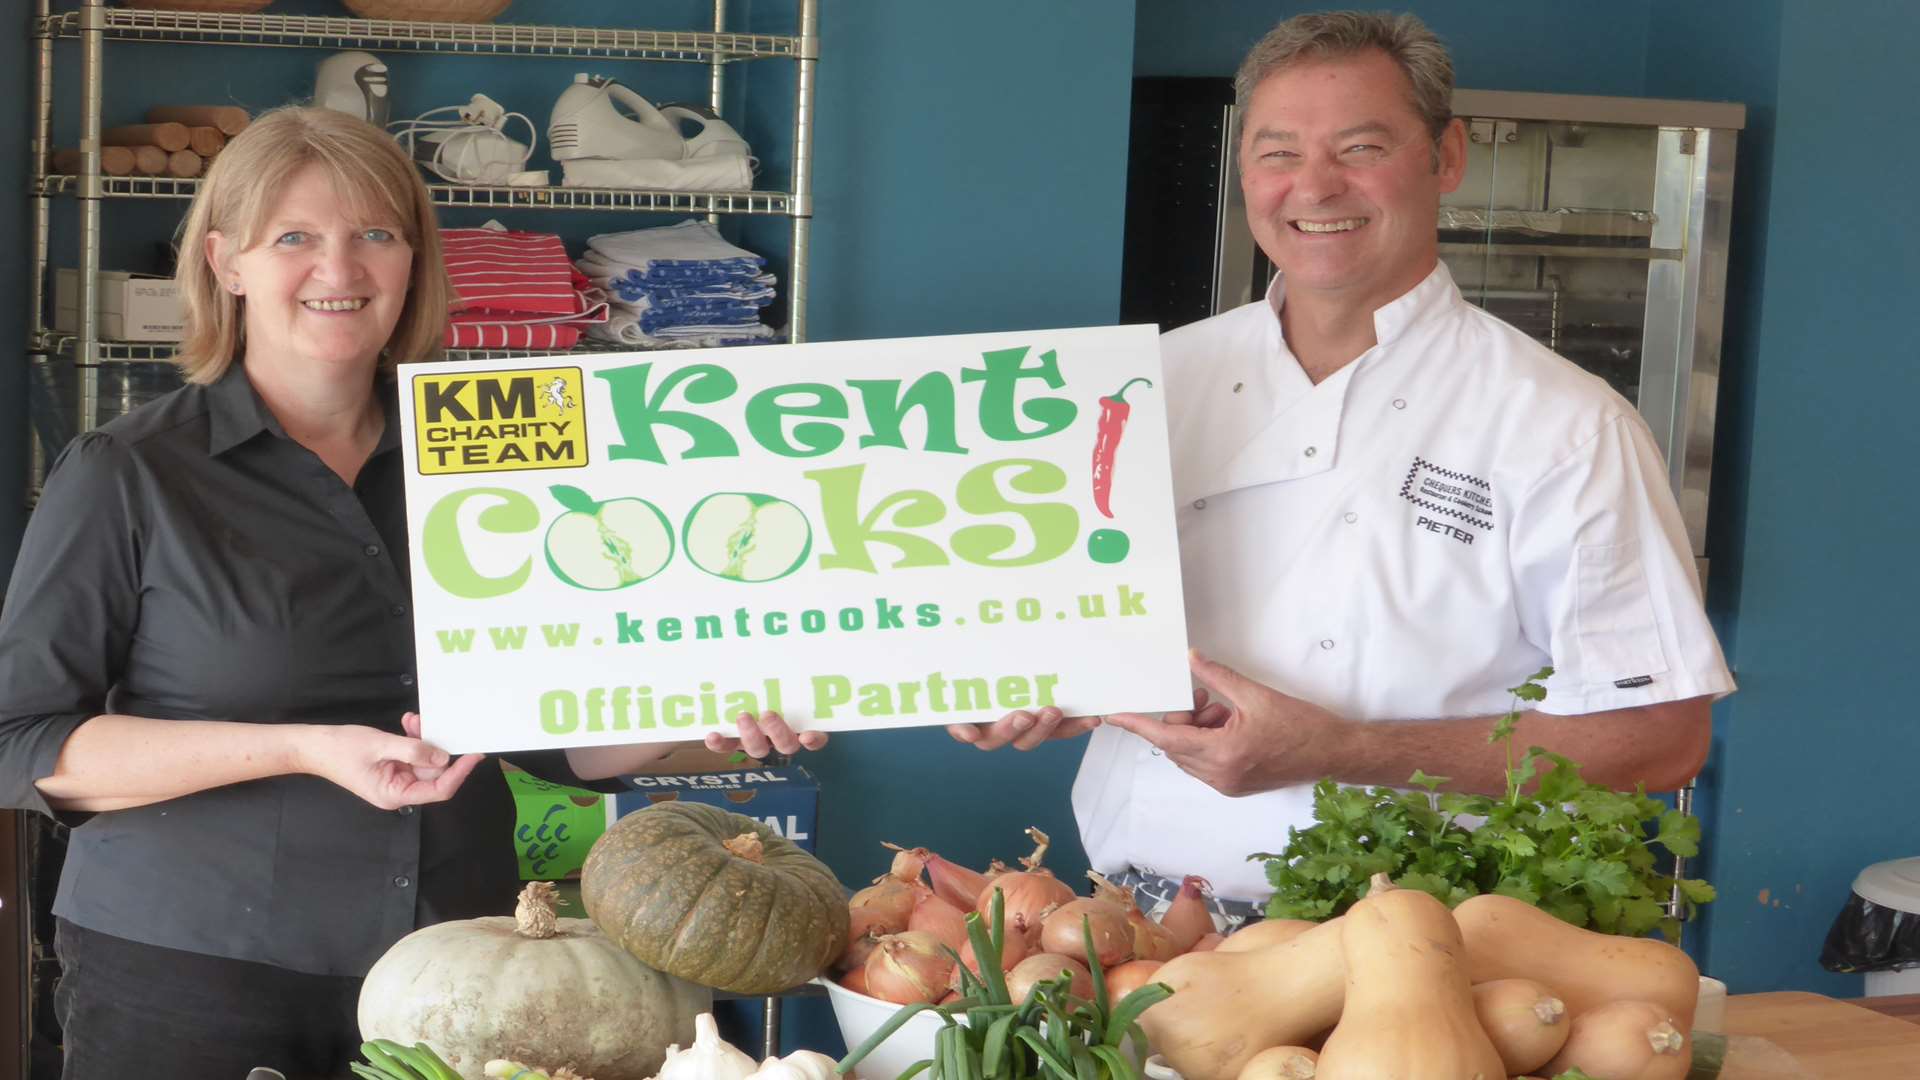 Stephanie Hayman and Pieter van Zyl of Chequers Kitchen Cookery School, Deal announce support of Kent Cooks which is now open for nominations.